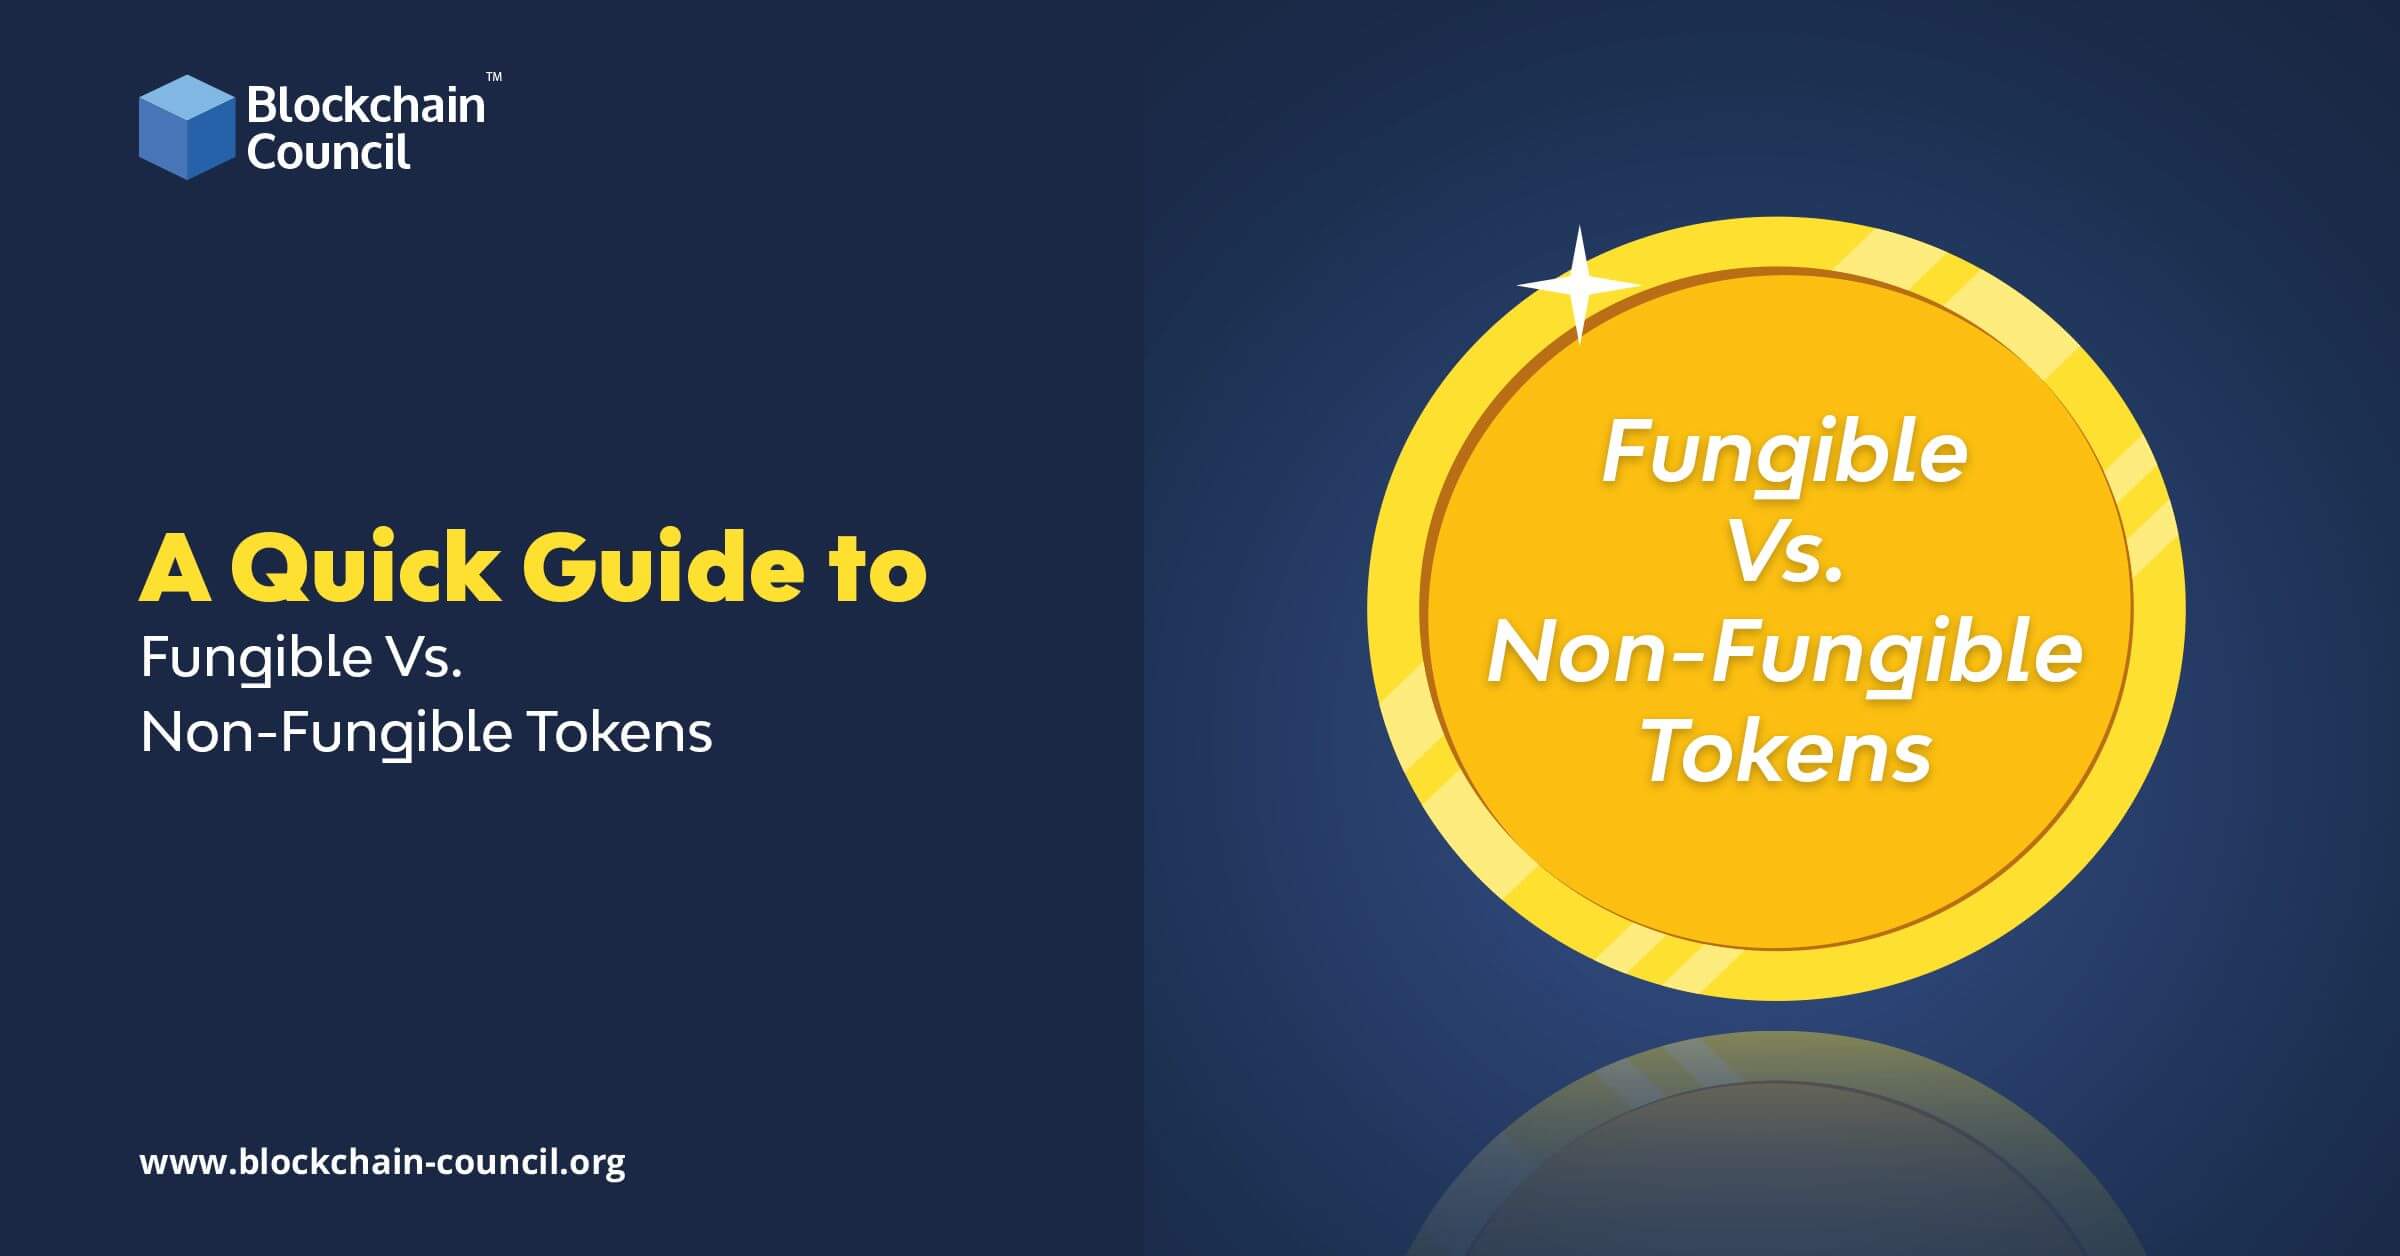 A Quick Guide to Fungible Vs. Non-Fungible Tokens